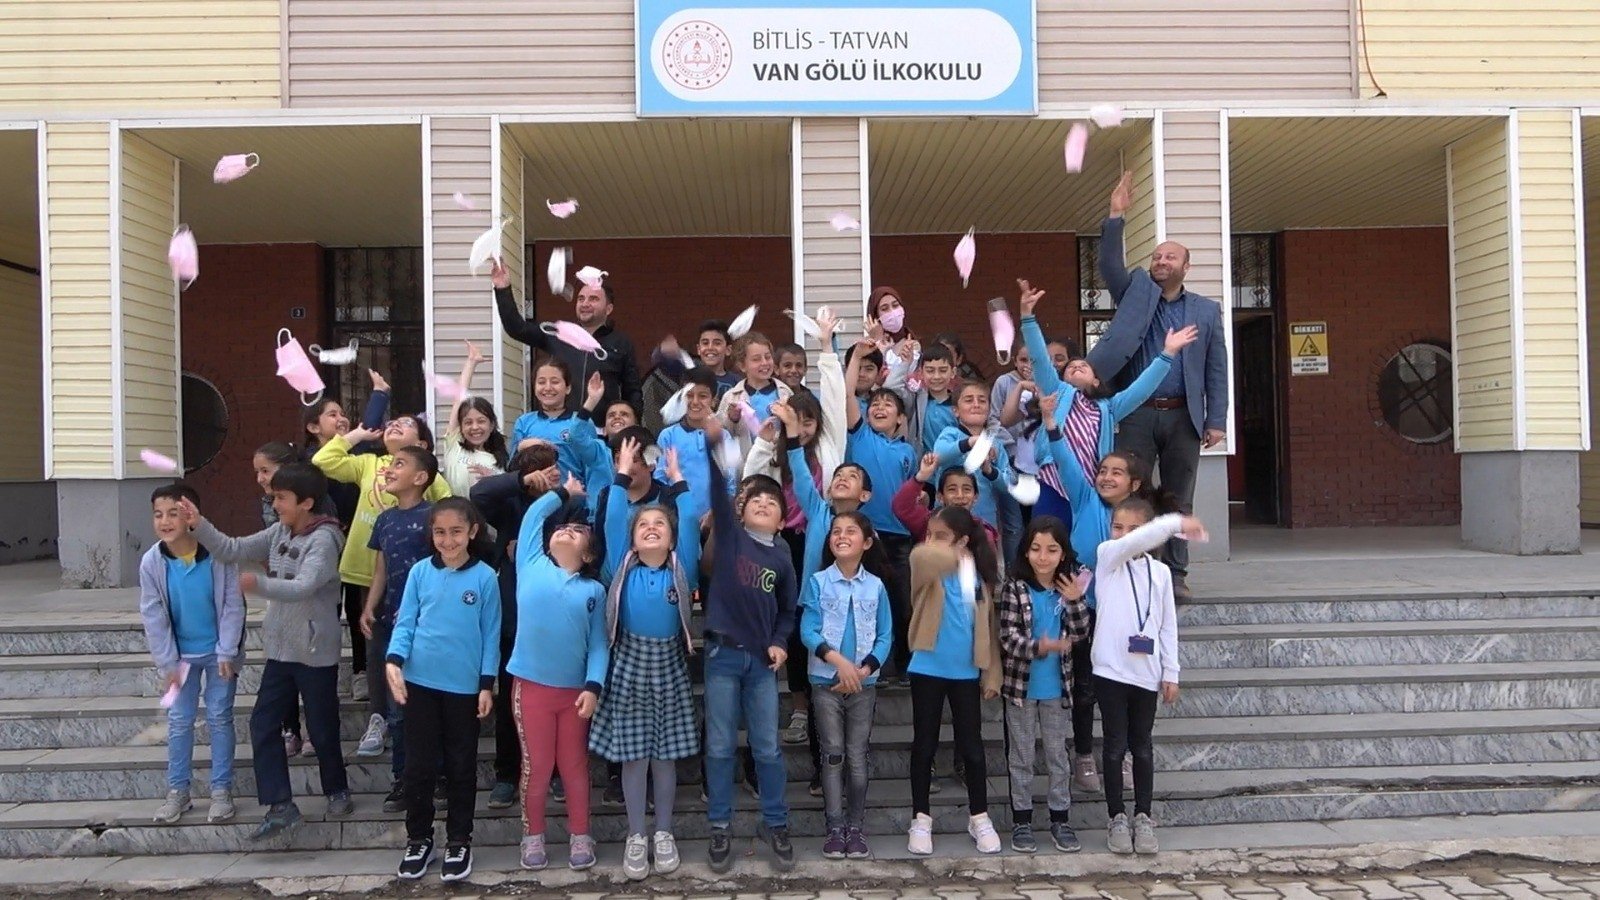 Students at a school throw COVID-19 masks into the air after the end of the mask mandate, in Bitlis, eastern Turkey, April 28, 2022. (IHA PHOTO)